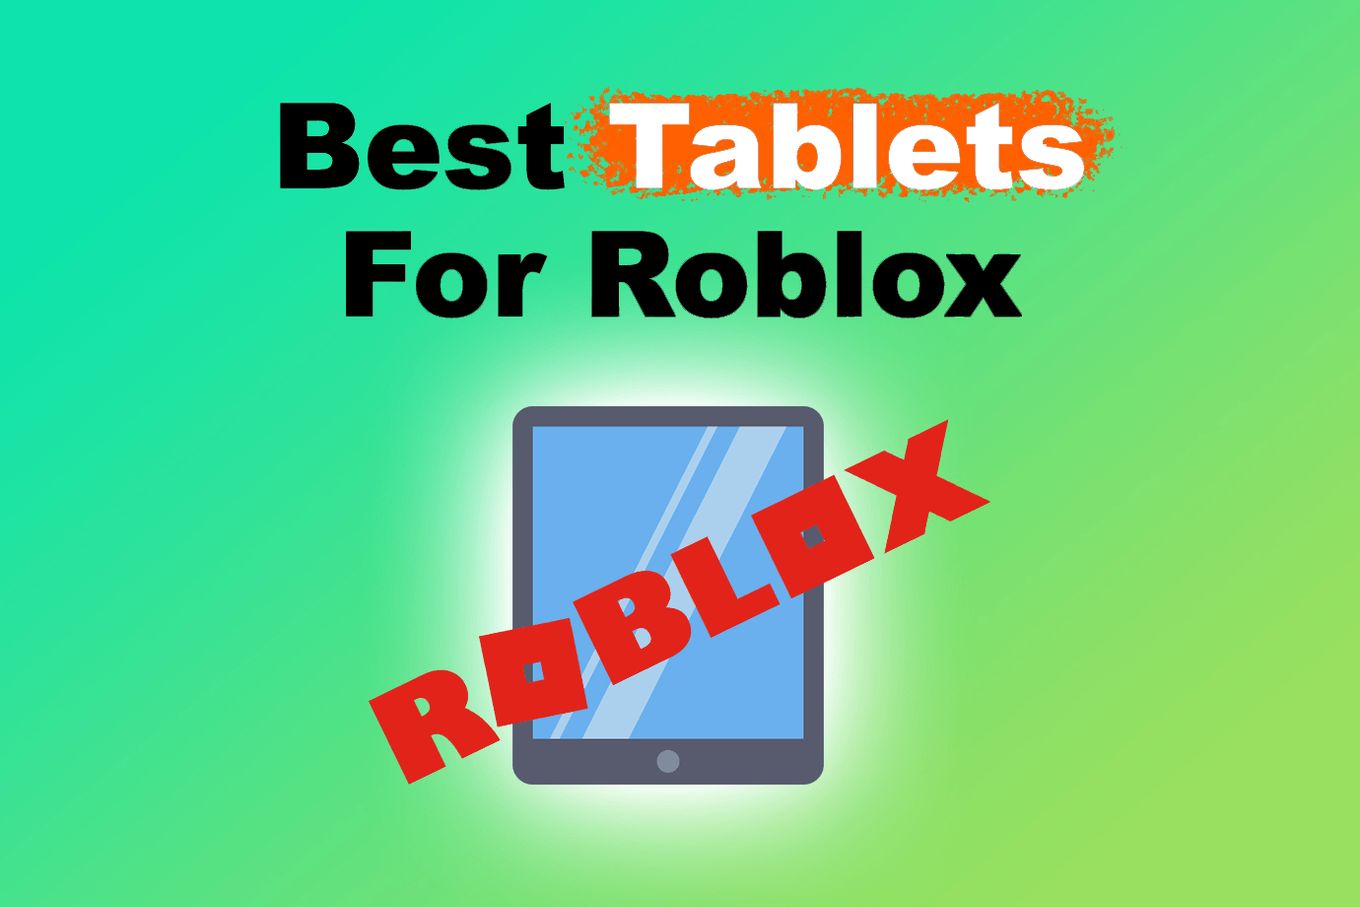 How to Download and Play Roblox on Your Android Smartphone in 2023